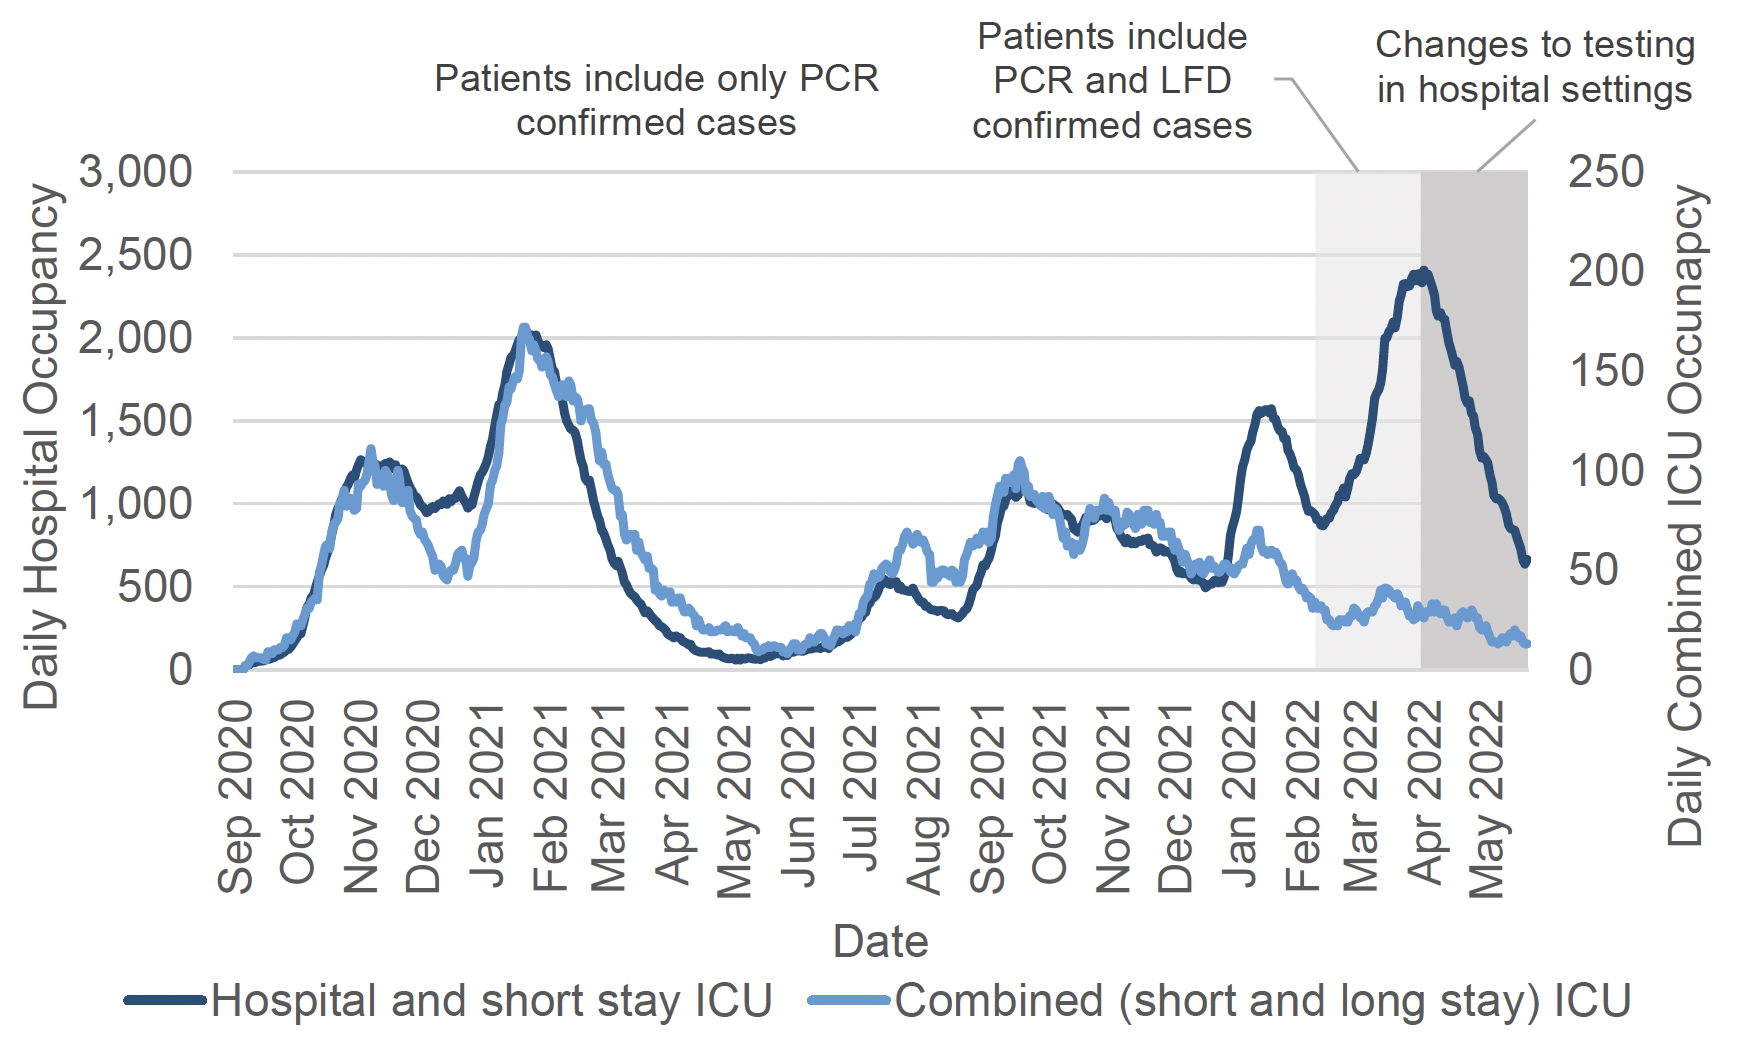 A line chart showing one line with the daily hospital occupancy (including short stay ICU) against the left axis and a line with ICU/HDU (including long and short stay) against the right axis, with recently confirmed Covid-19 between September 2020 and May 2022. The number of Covid-19 patients in hospital peaked in November 2020, January 2021, July 2021, September 2021, January 2022, and early April 2022. The number of Covid ICU patients peaked in November 2020, January 2021, September 2021, January 2022 and mid-March 2022. The chart has notes explaining that before 9 February 2022, patients were only included if they had a recent positive laboratory confirmed PCR test. After 9 February, both PCR and LFD confirmed cases were included. Patient testing requirements changed on the 1 April 2022, which may mean a reduction in asymptomatic cases of Covid-19 detected and a corresponding decrease in Covid-19 related occupancy. In addition, from 1 May 2022, testing changed from asymptomatic population-wide testing, to targeted testing for clinical care and surveillance. Therefore data should be interpreted with caution and over time comparison should be avoided.